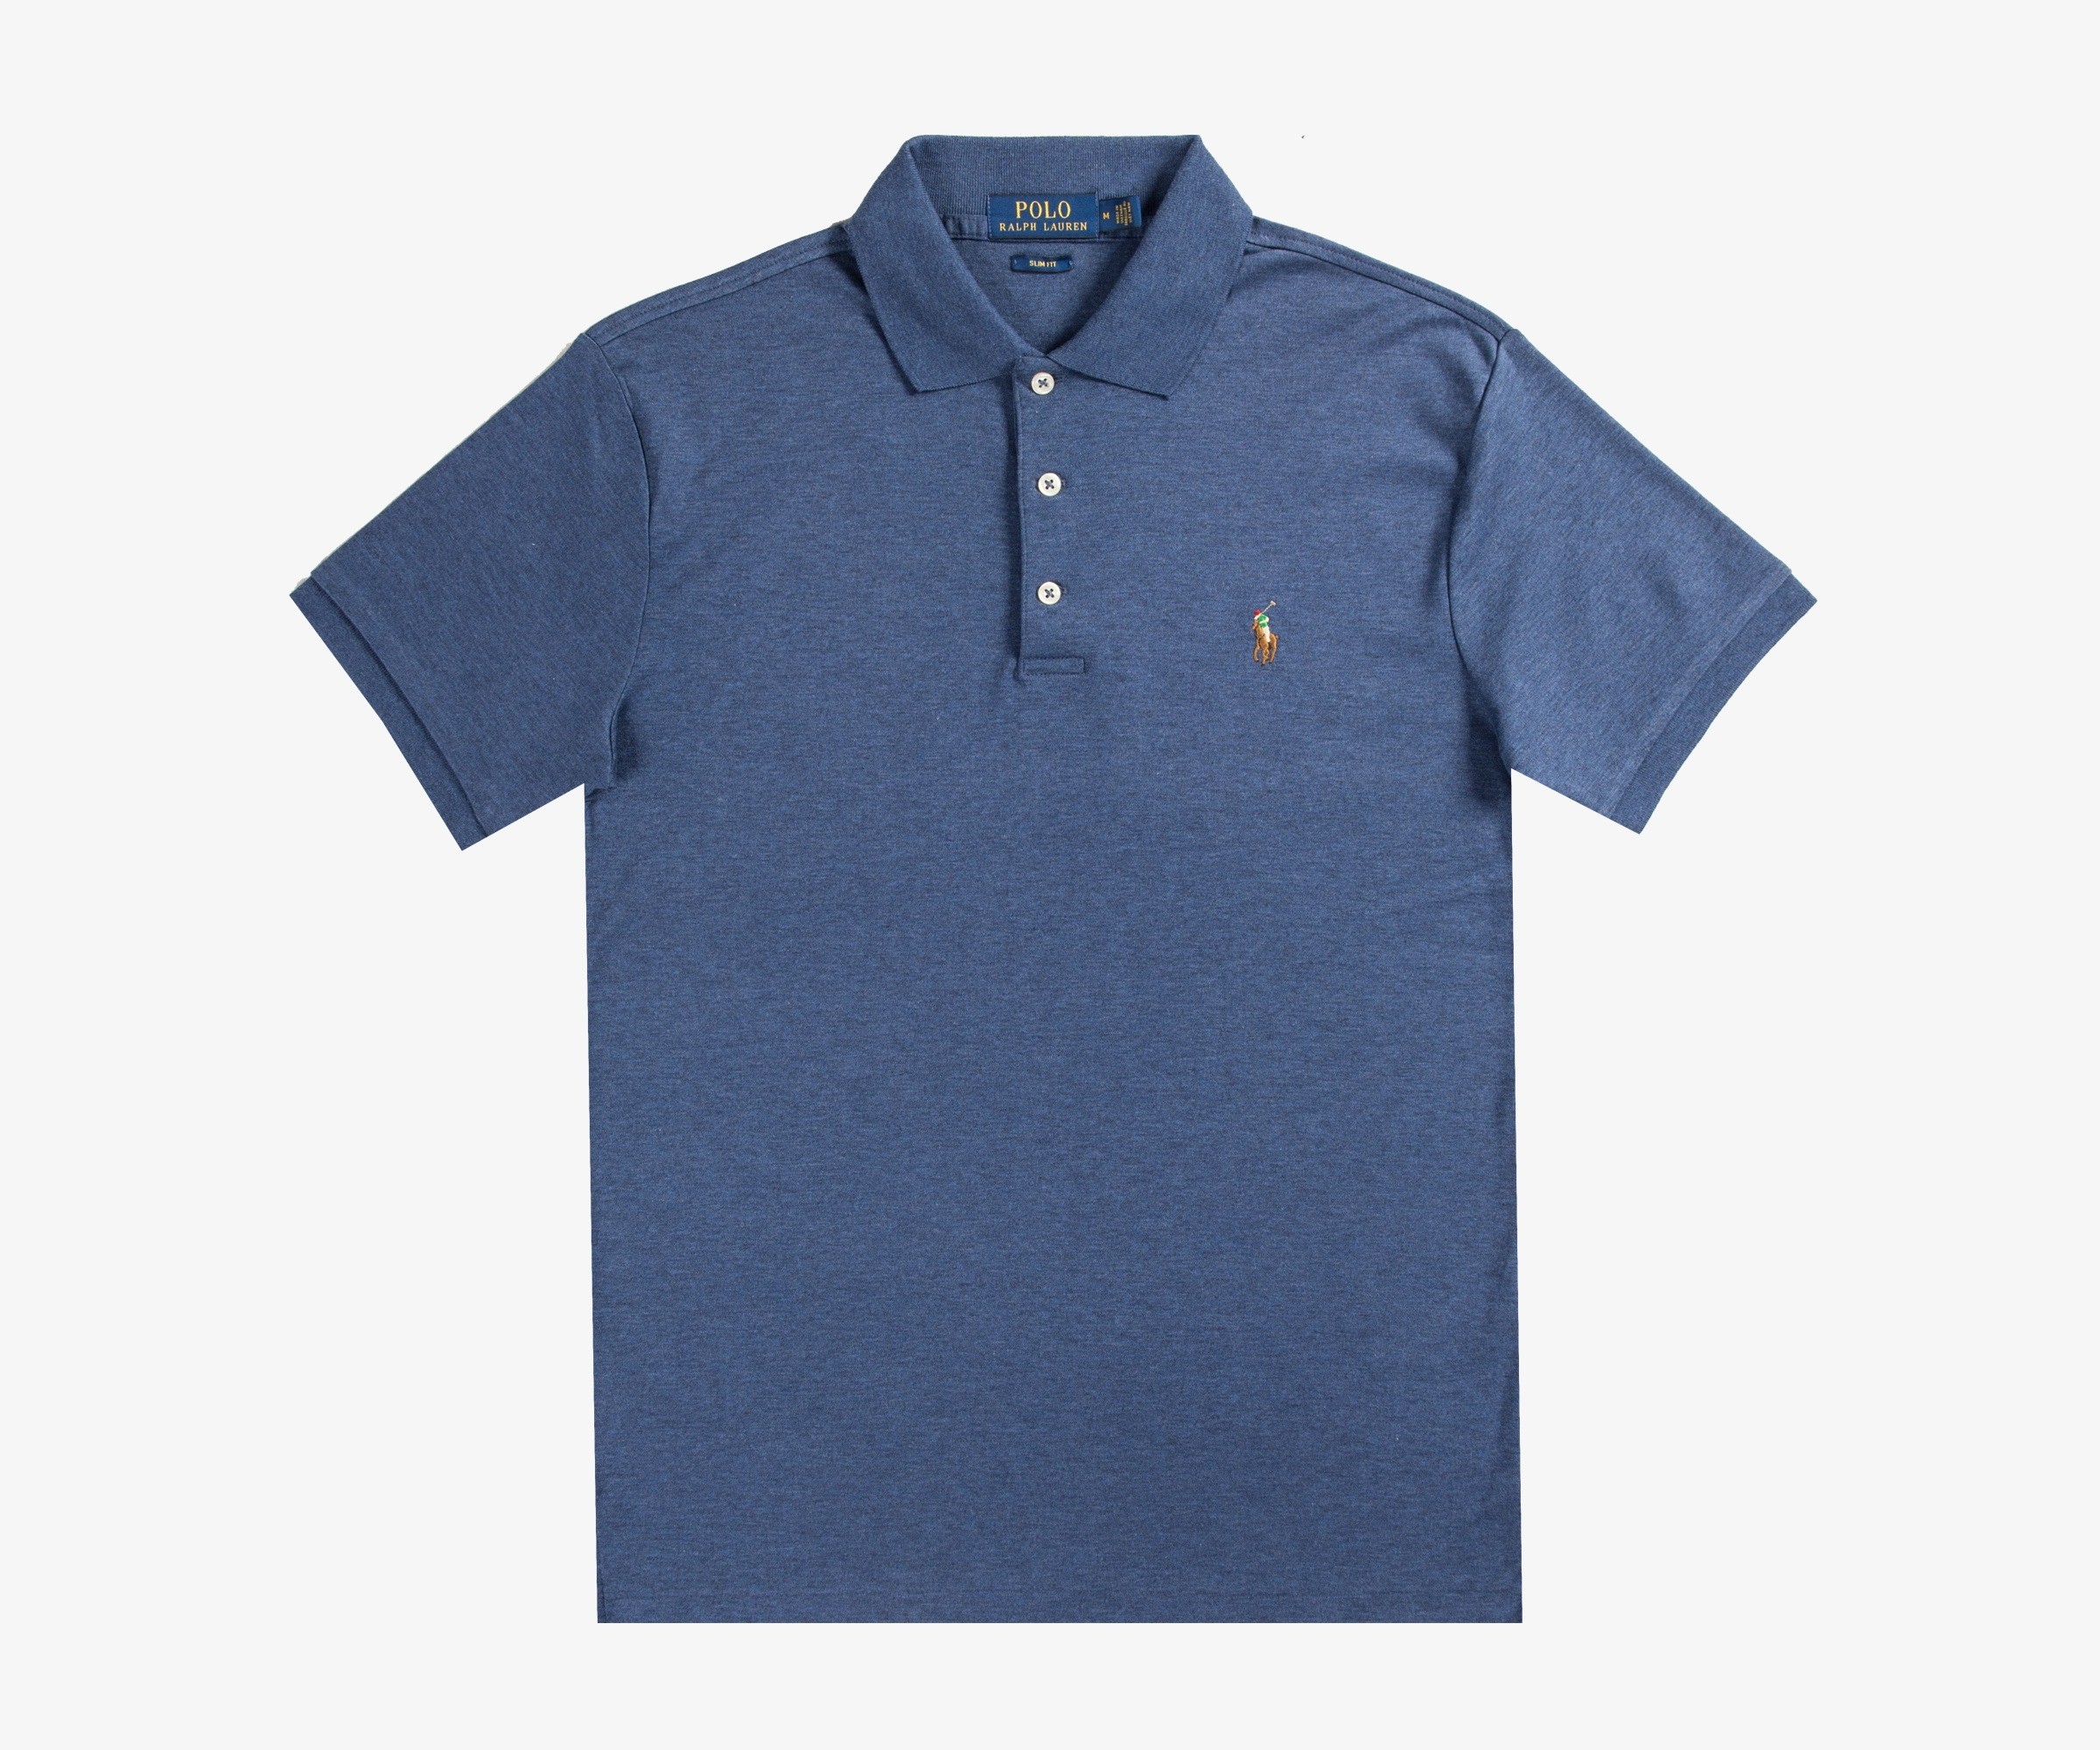 Polo Ralph Lauren Slim Fit Pima Soft Touch Polo Navy Heather